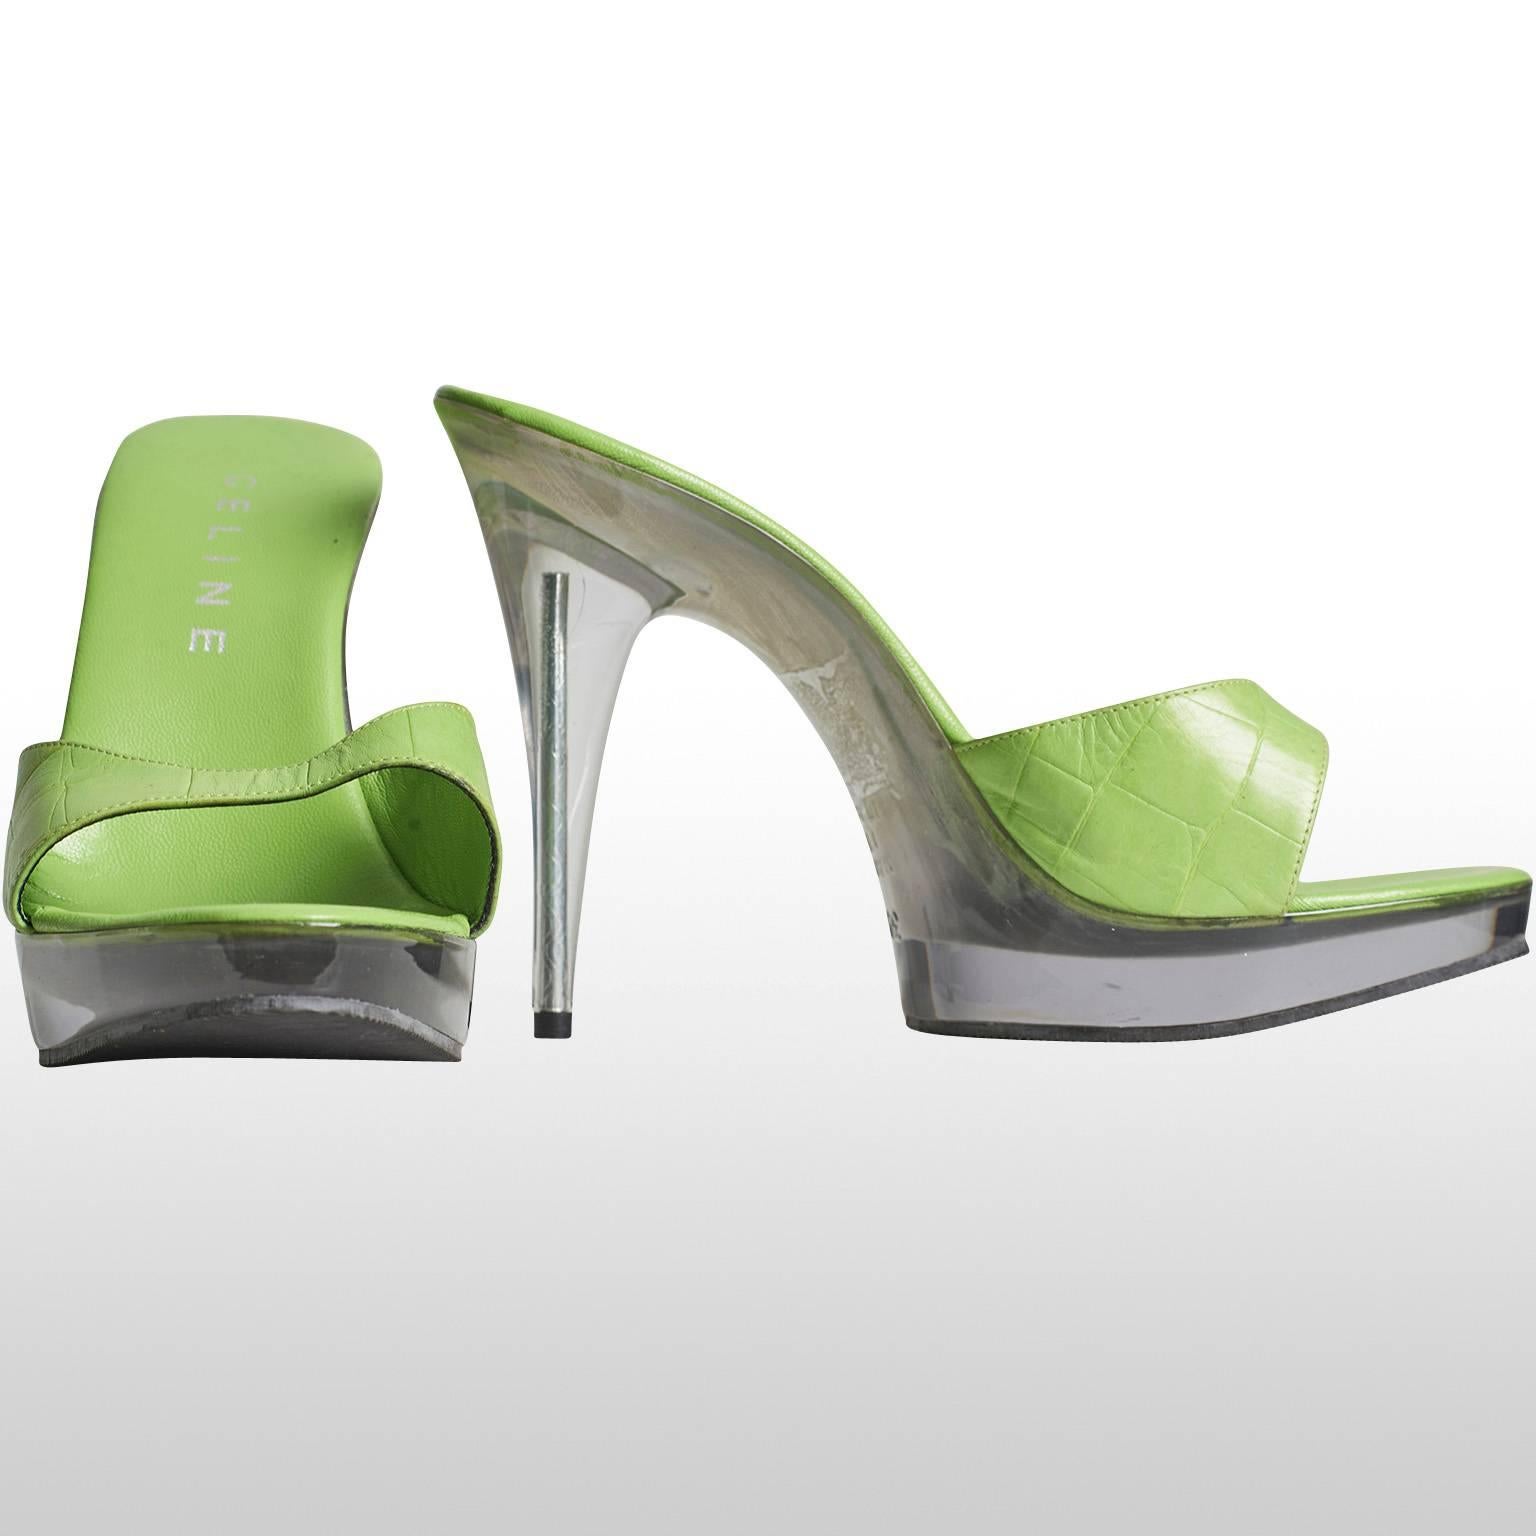 This is a playful lime green platform sandal by the designer Celine. The platform is one inch high and the total hight of the heel is five inches tall. Both the platform and the heel is made out of a clear plastic. The insole and the vamp of the